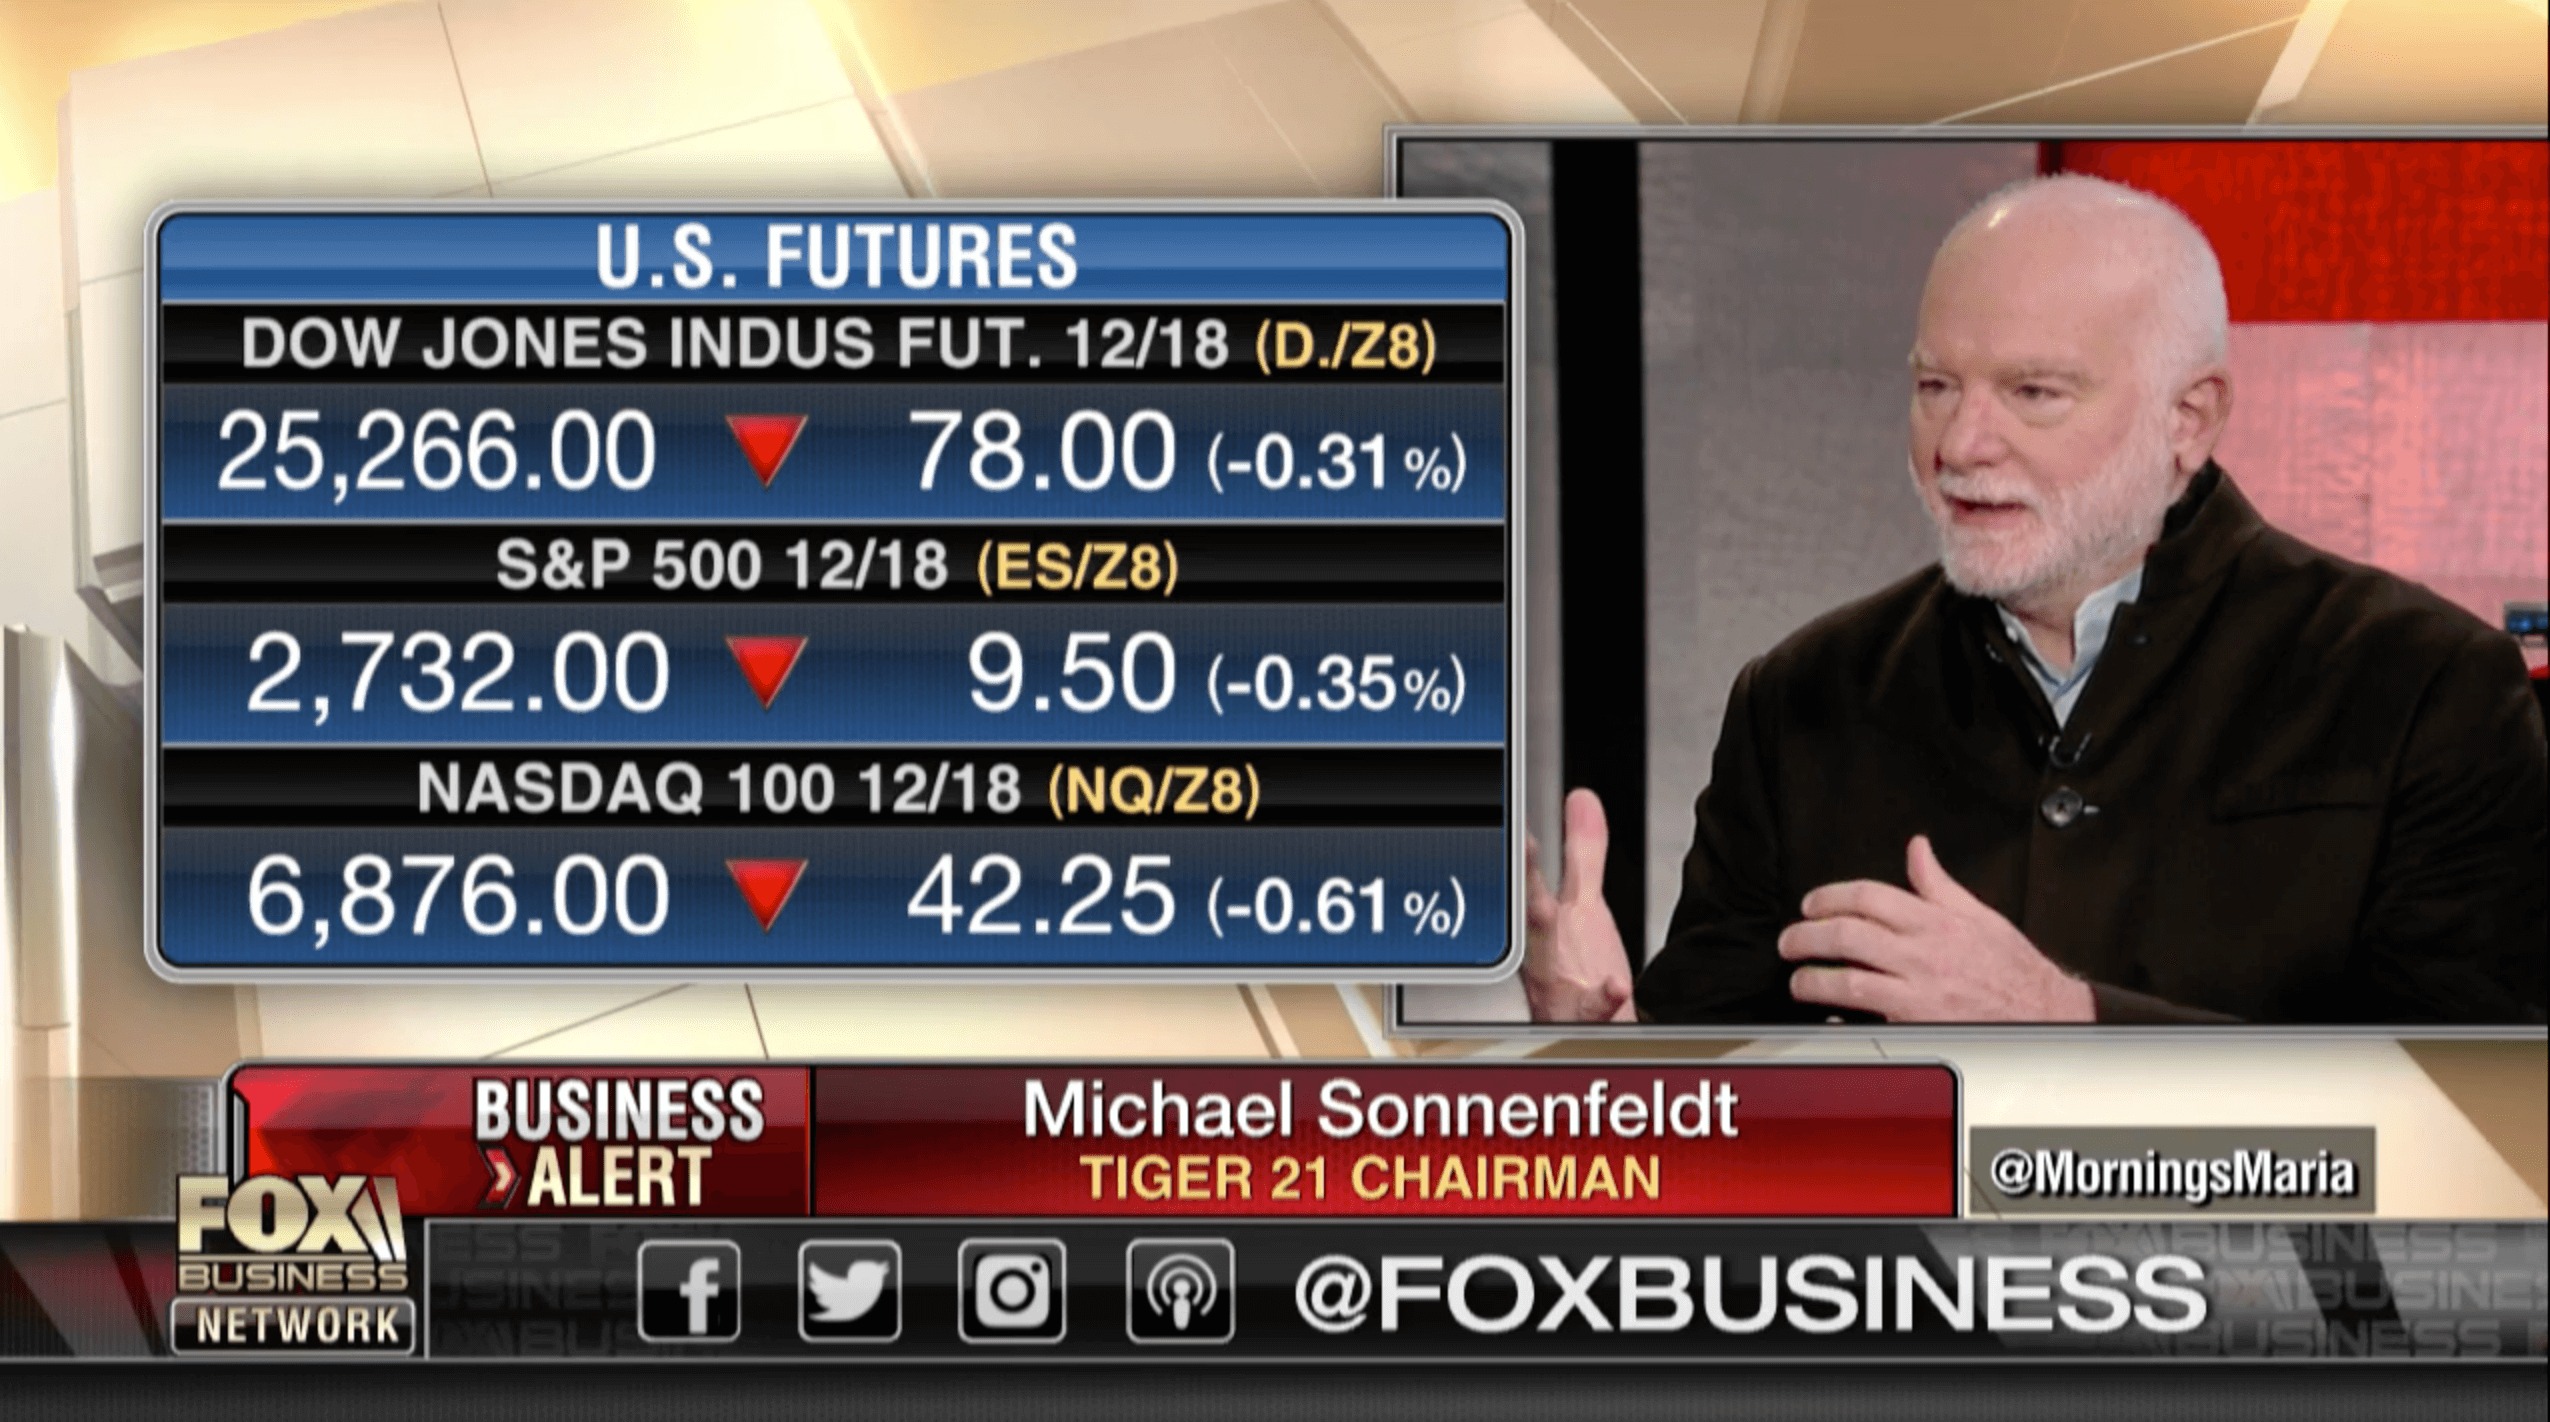 PART ONE: TIGER 21 FOUNDER ADDRESSES ON FOX BUSINESS THE IMPACT OF FEDERAL RESERVE POLICY